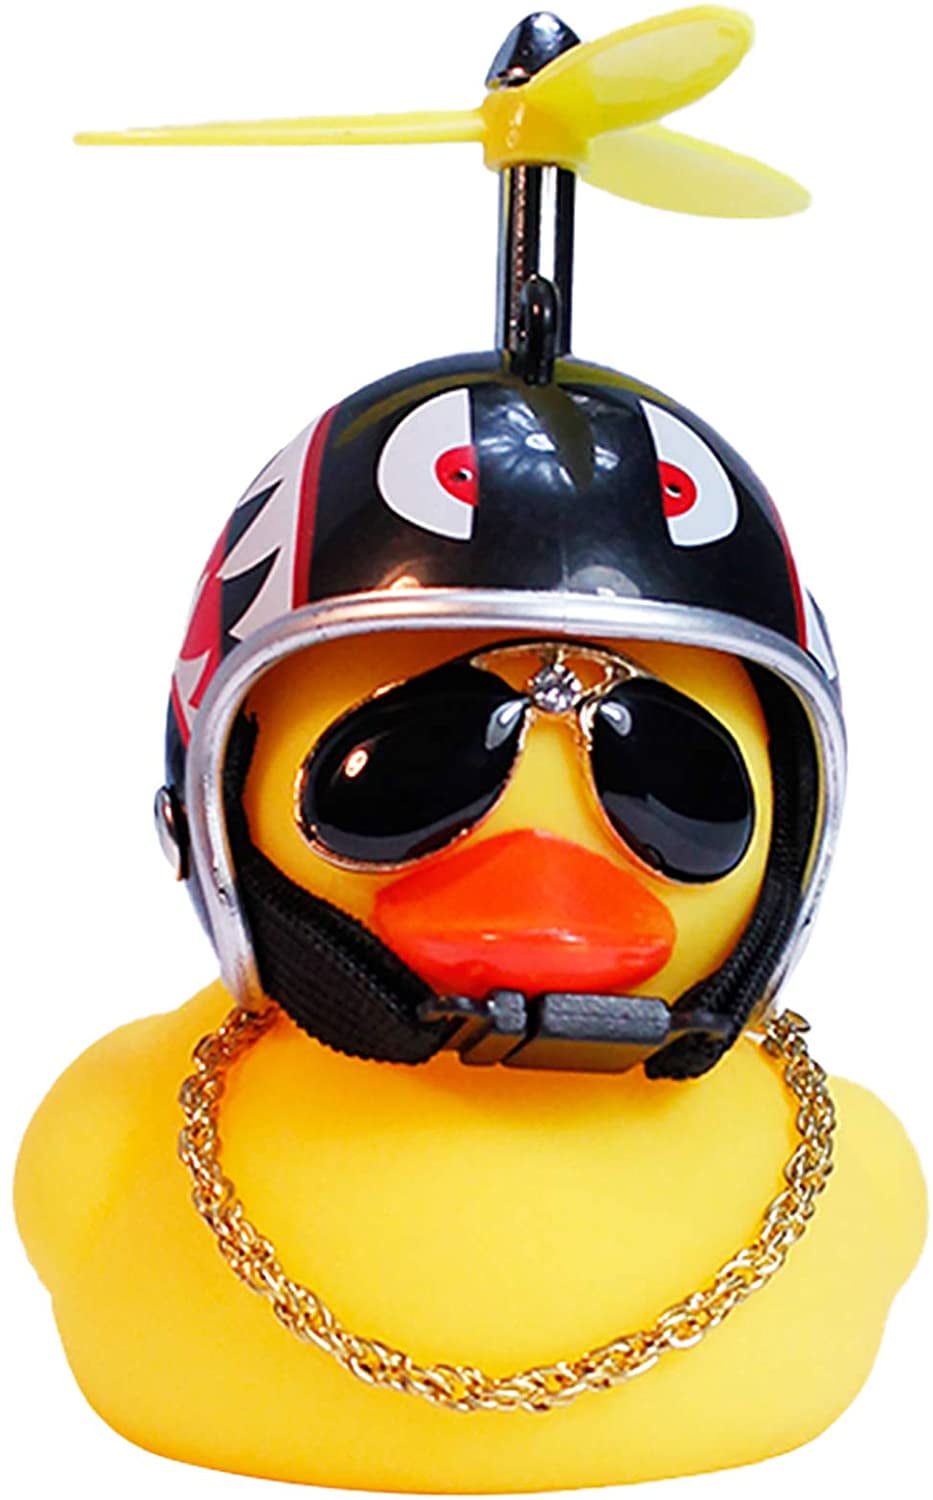 Yellow Rubber Duck Car Ornaments Rubber Ducks for Car Decor Gold Chain Sunglasses Car Dashboard Decorations Rubber Ducky with Helmet 